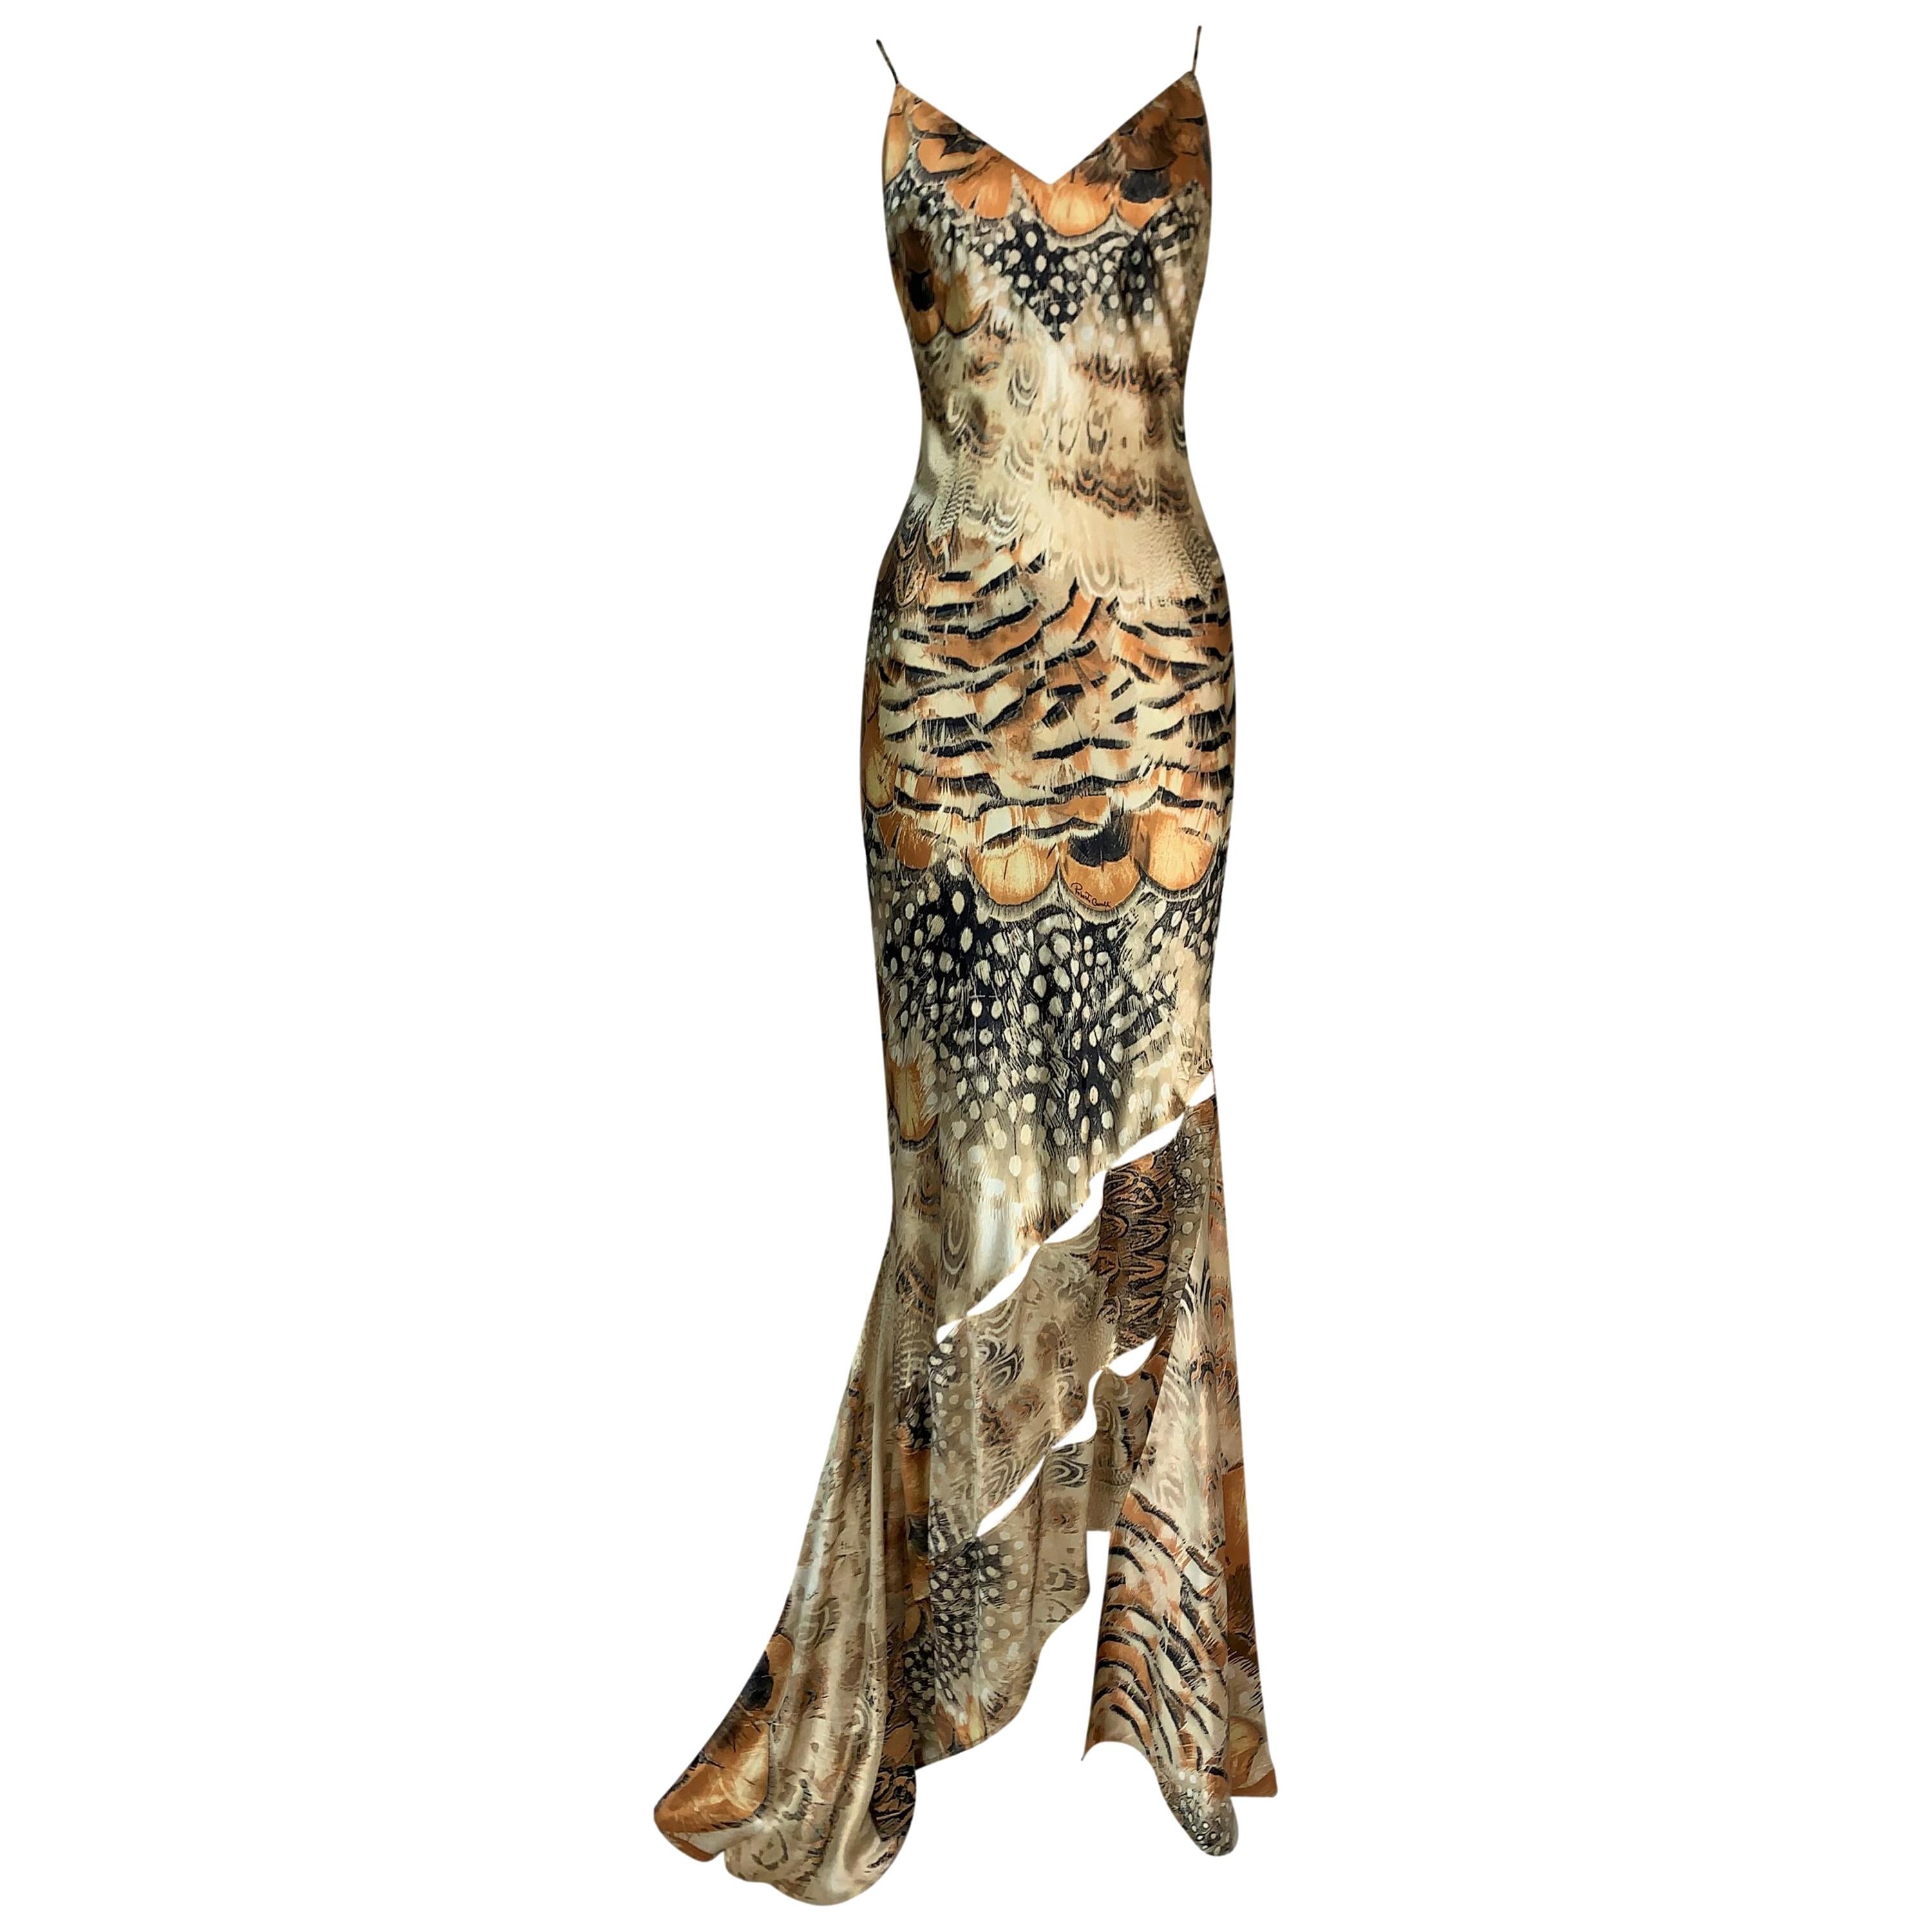 Unworn S/S 2004 Roberto Cavalli Feather Print Cut-Out Gown Dress